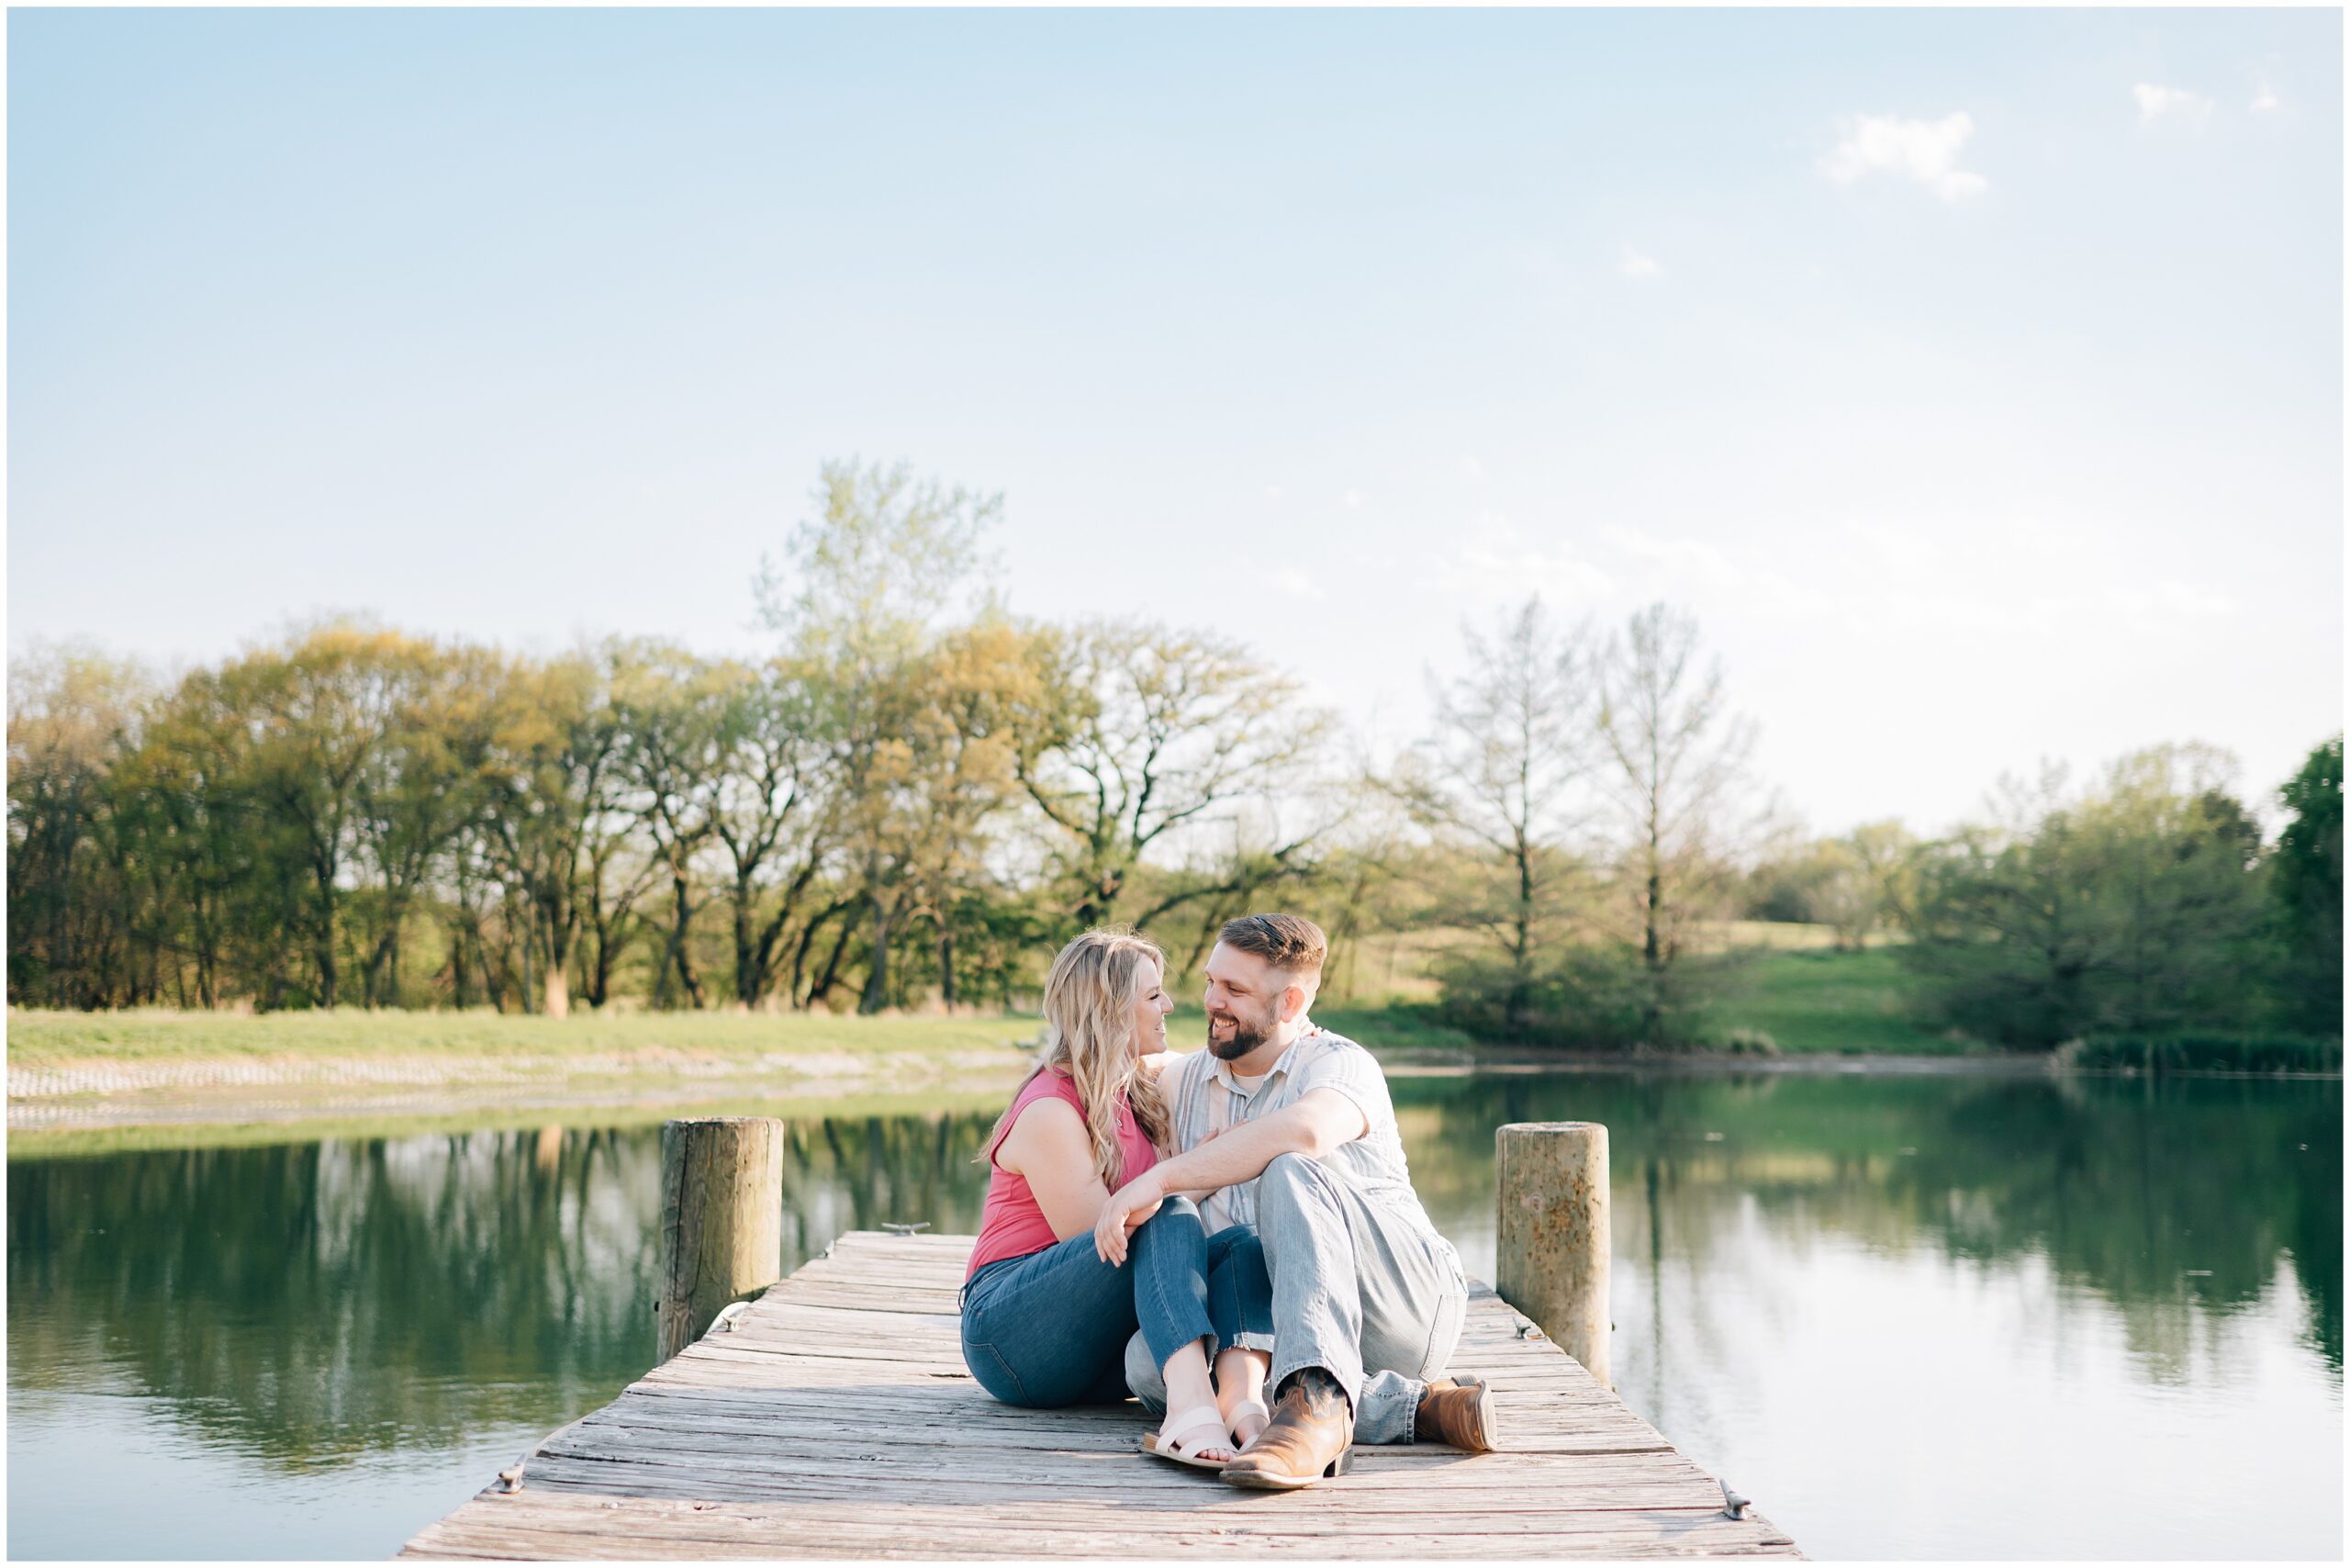 Engaged couple sits on a boat dock and talks. Photo by Anna Brace, an Omaha wedding photographer.
